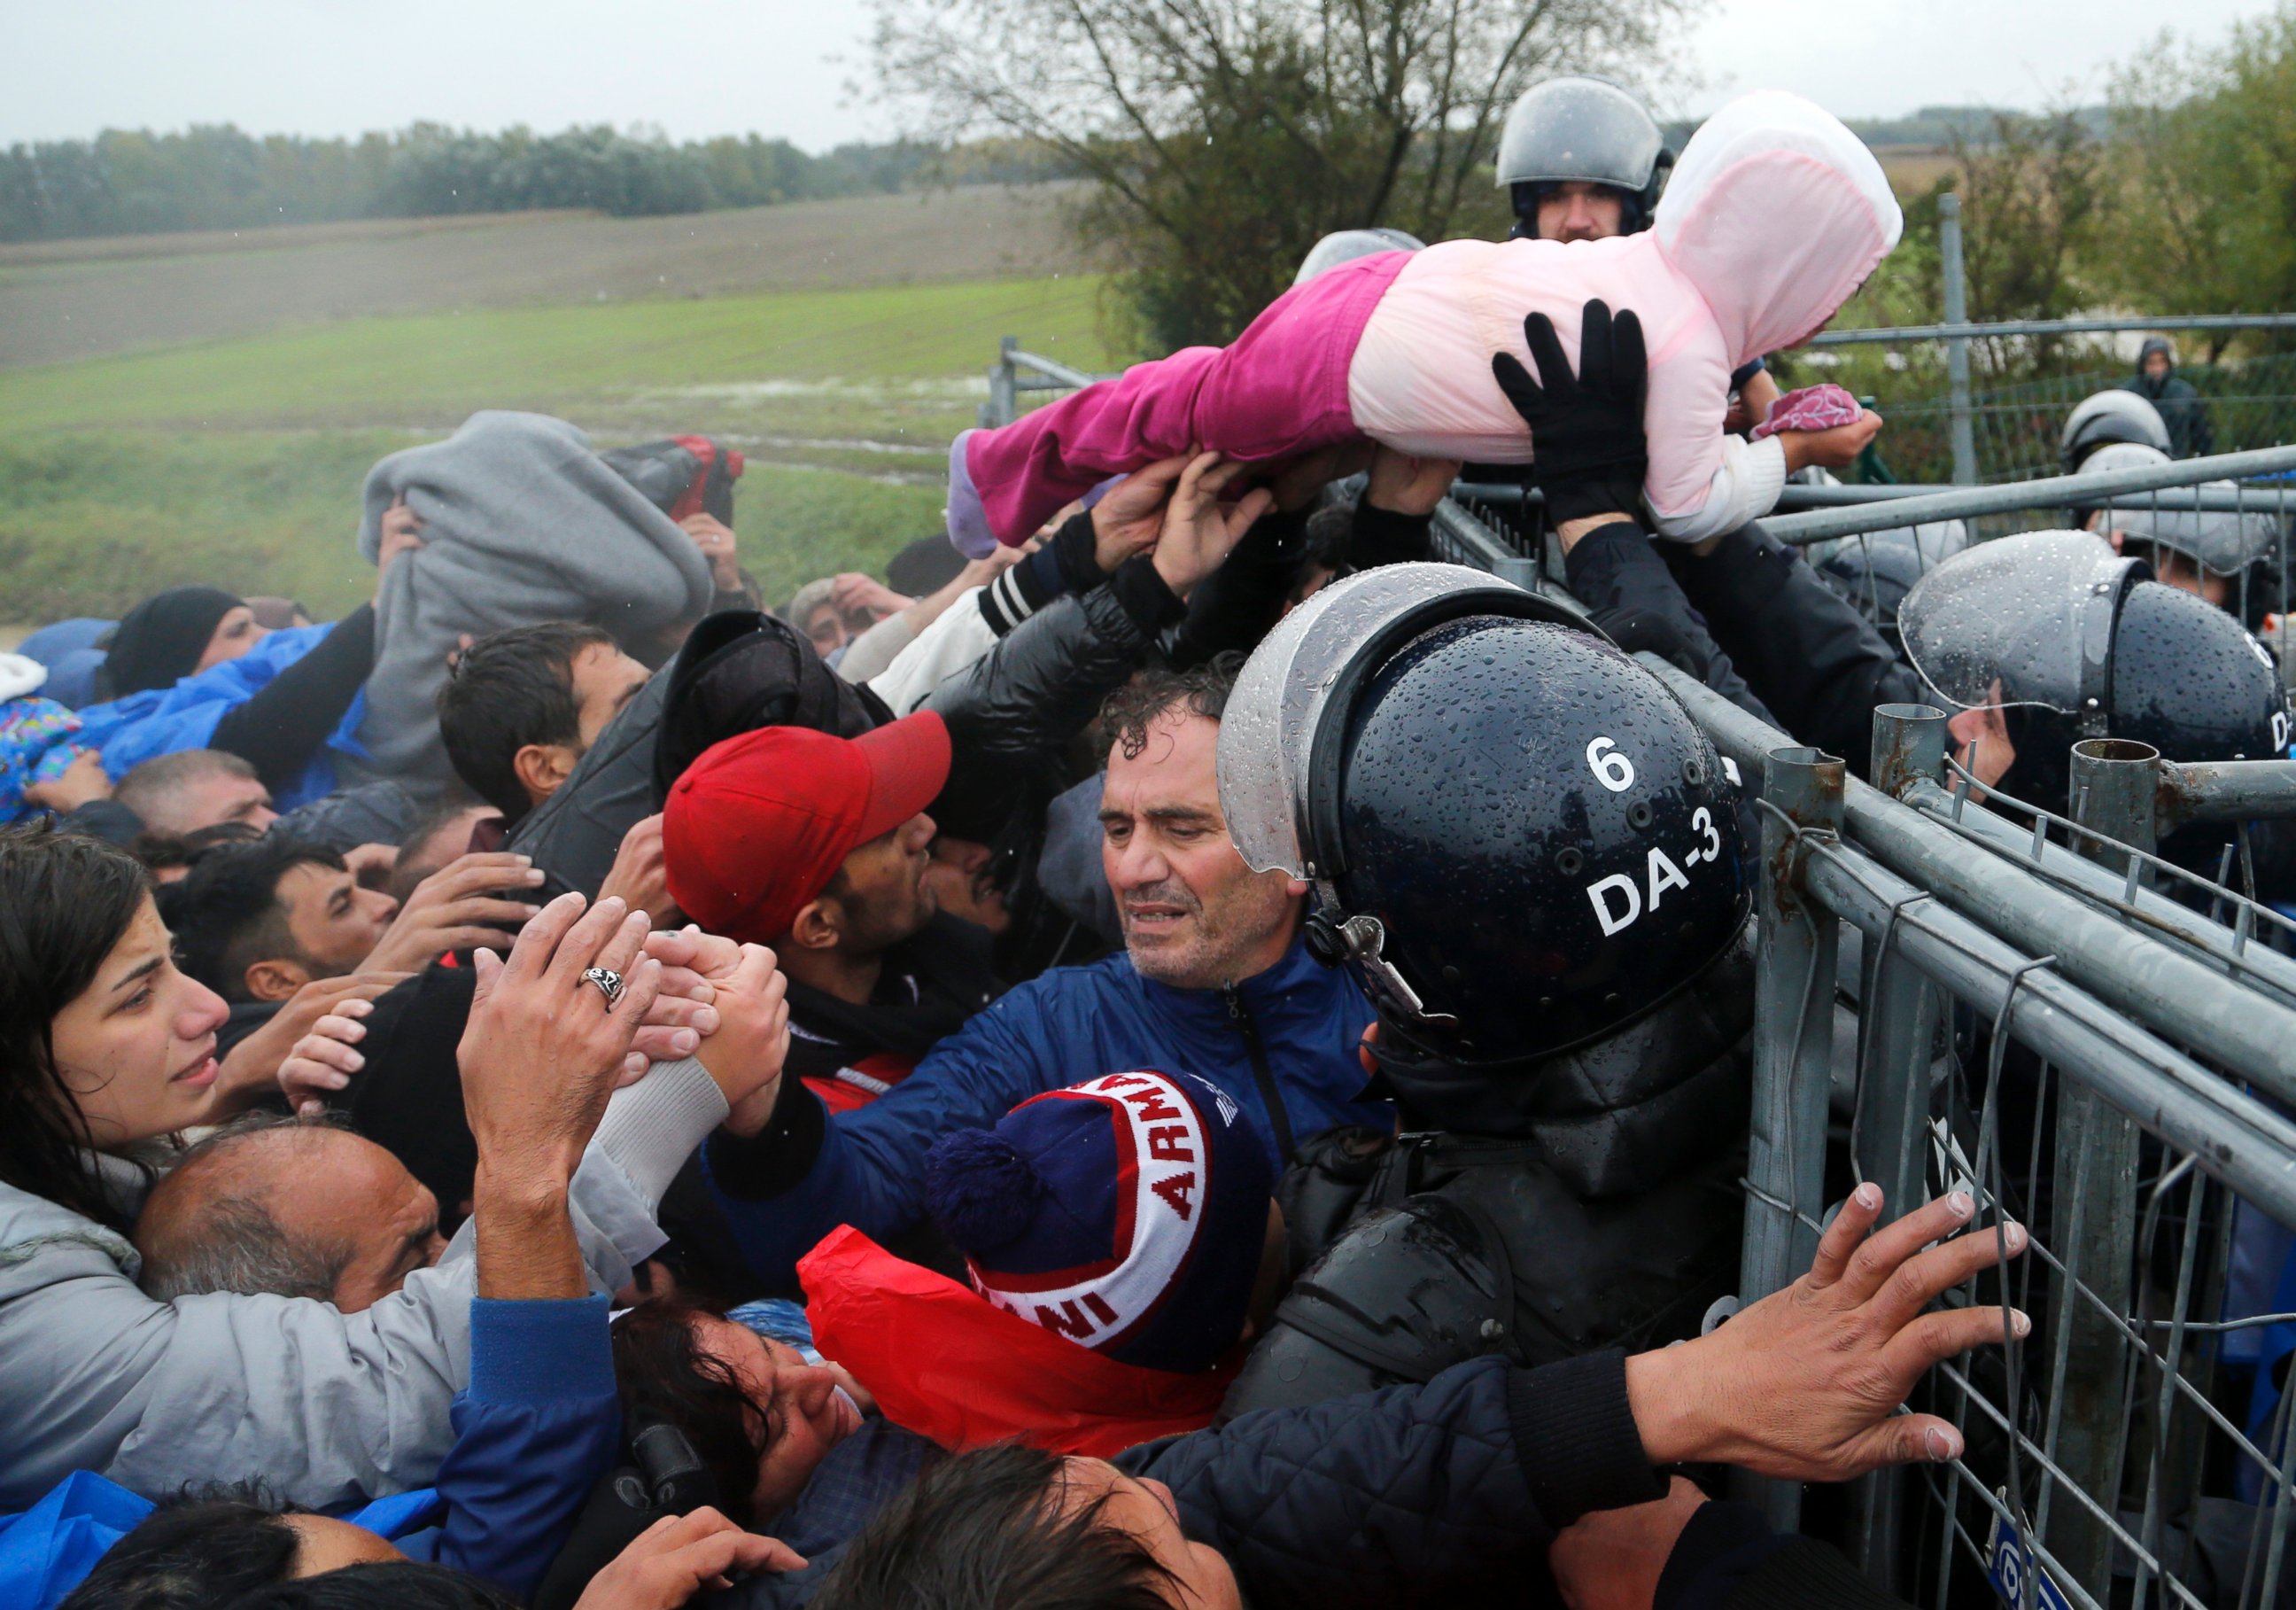 PHOTO: A child is lifted over a fence by Slovenian policemen as migrants attempt to cross the border near Trnovec, Croatia, Oct. 19, 2015.